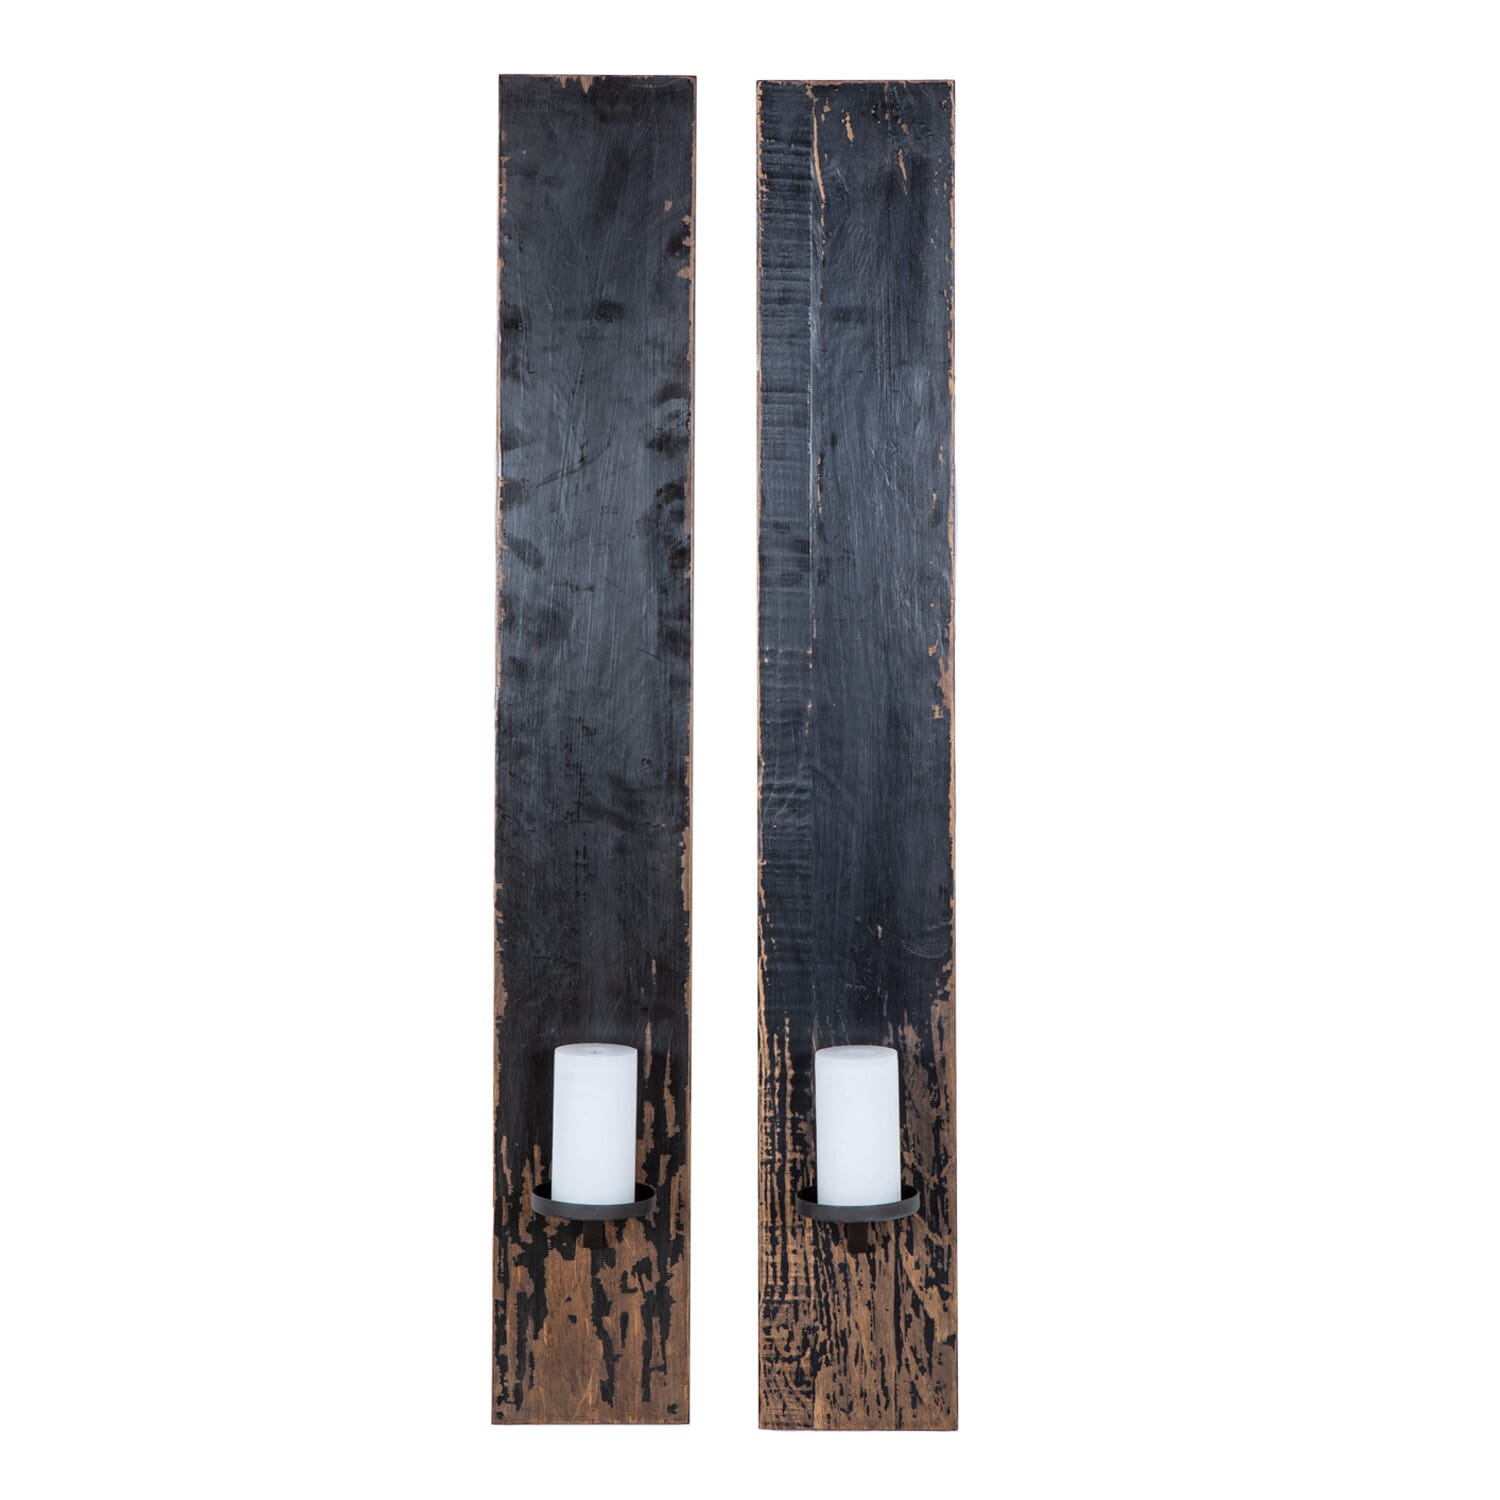 S/2 Tall Wall Sconce - Antique Black